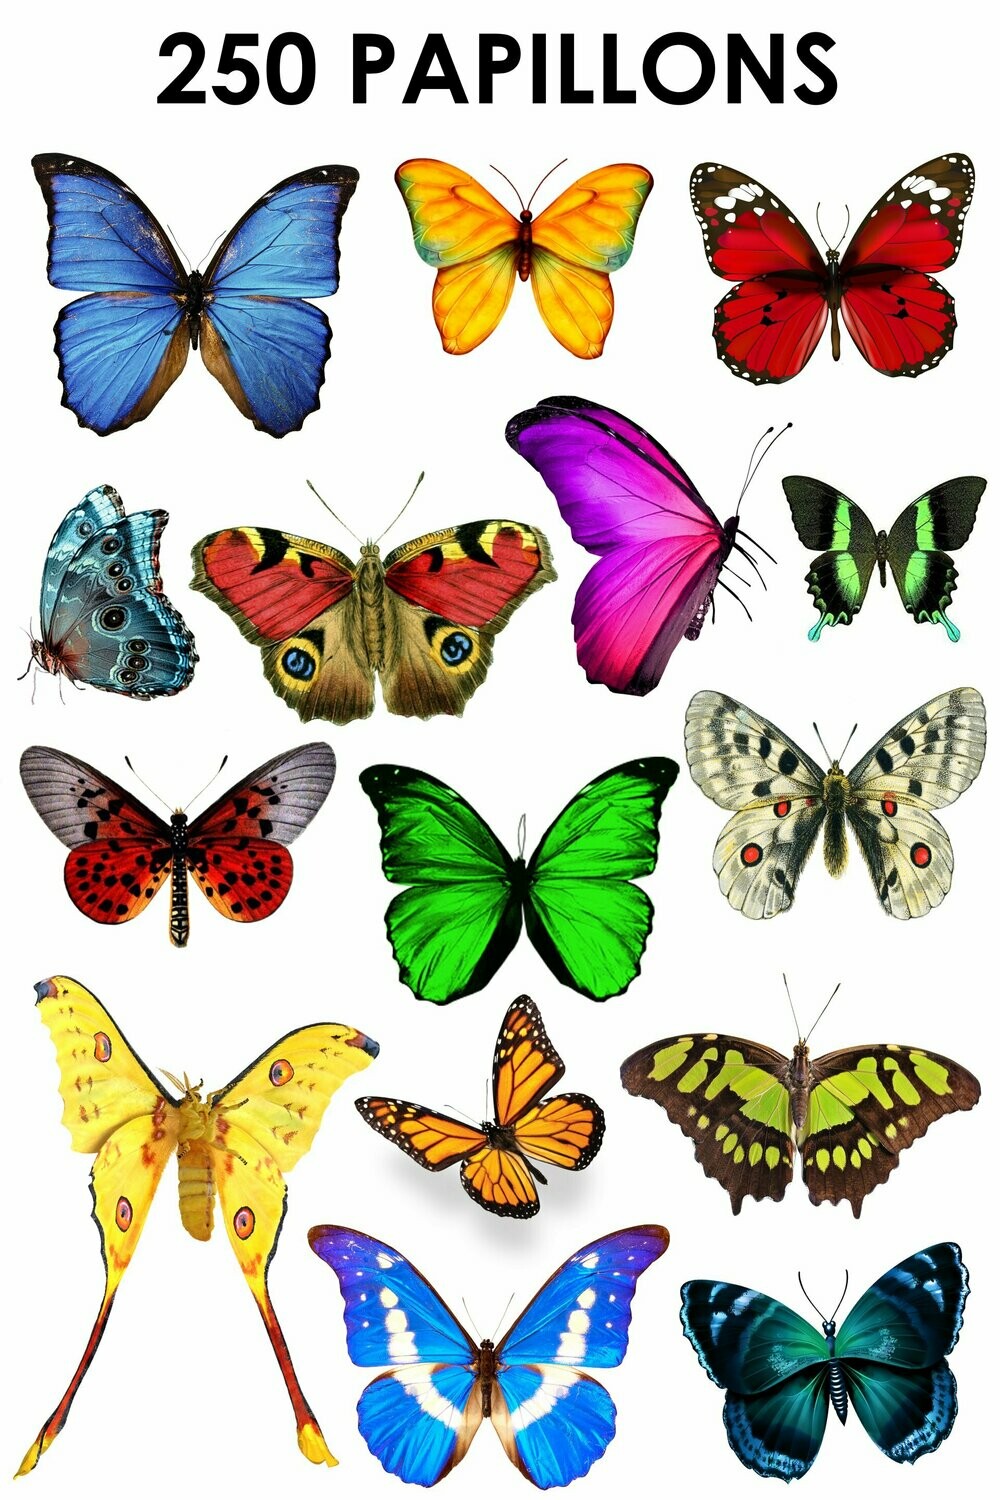 E. PACK PAPILLONS 250 PNG